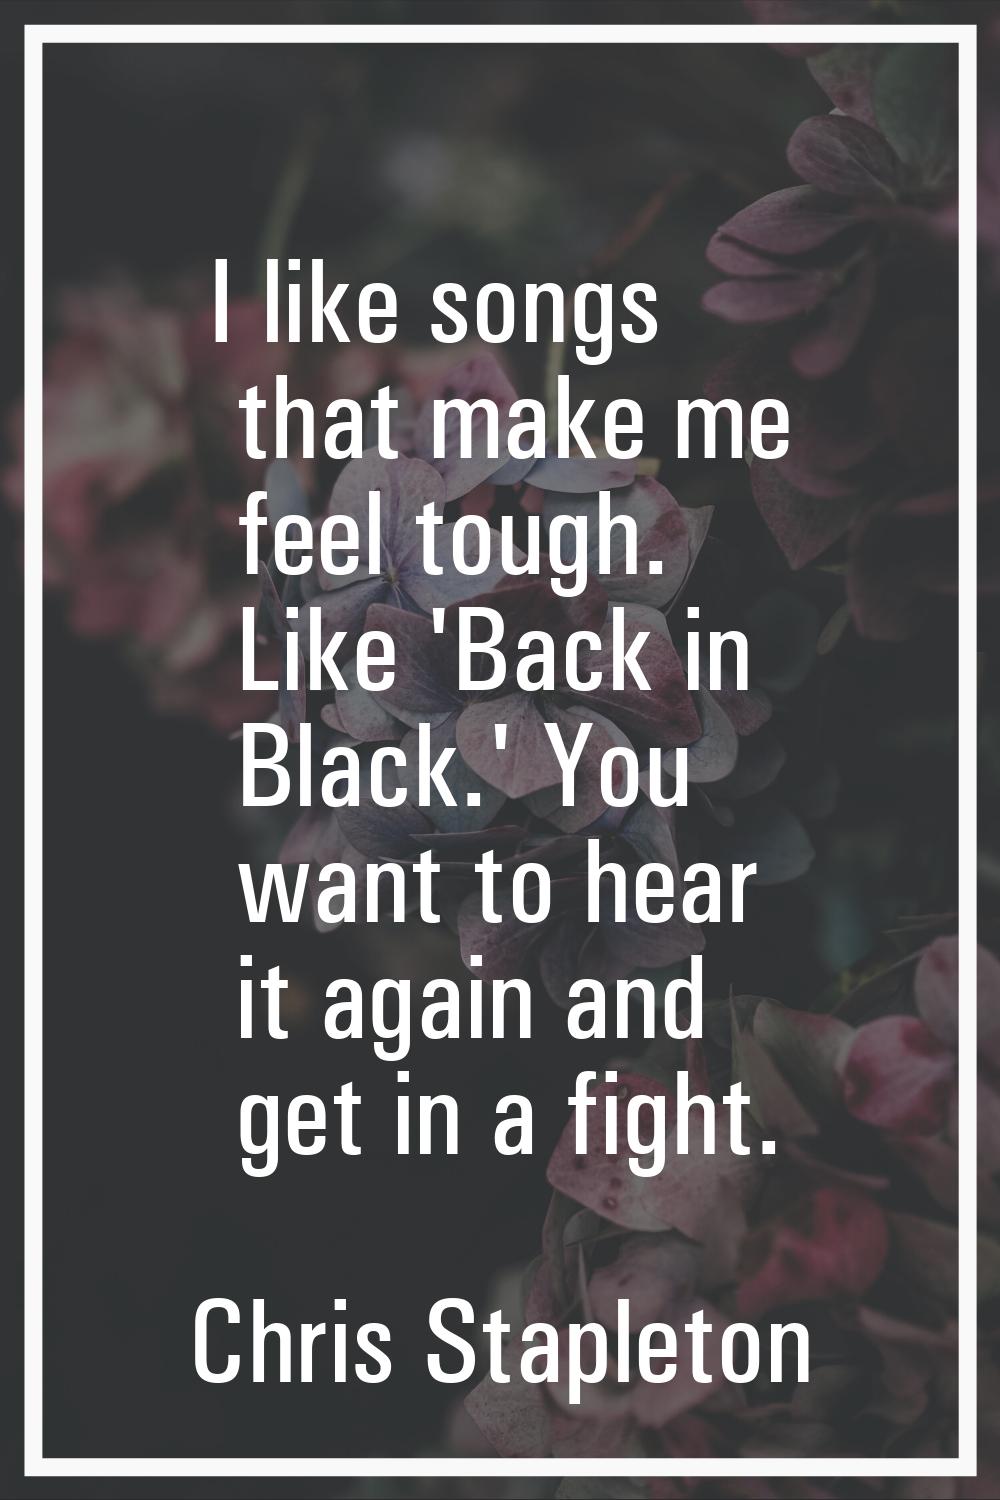 I like songs that make me feel tough. Like 'Back in Black.' You want to hear it again and get in a 